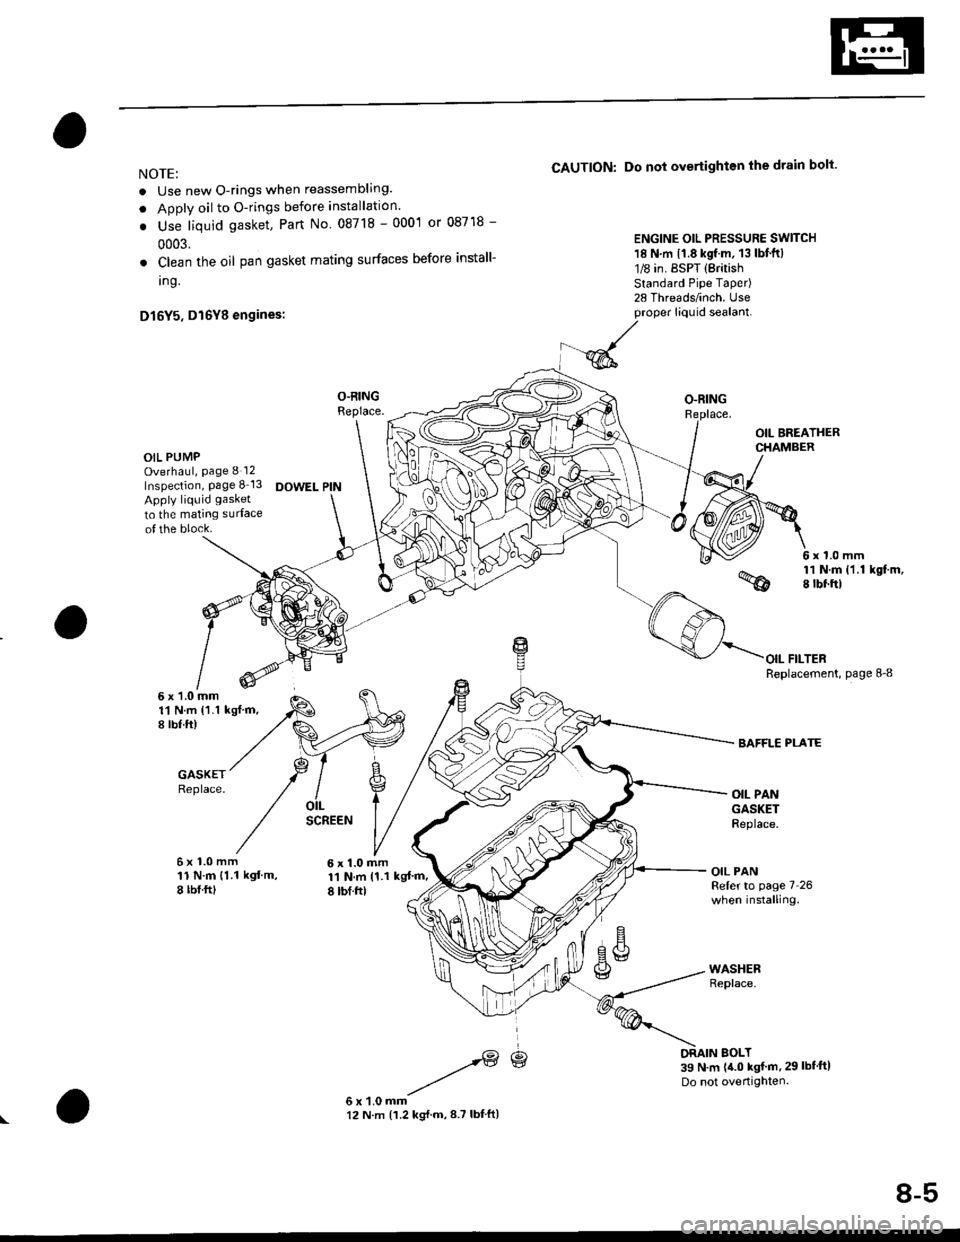 HONDA CIVIC 1996 6.G Workshop Manual NOTE:
. Use new O-rings when reassembling.
. Apply oil to O-rings before installation.
. Use liquid gasket, Part No 08718 - 0001 or 08718 -
0003.
. Clean the oil pan gasket mating surfaces before inst